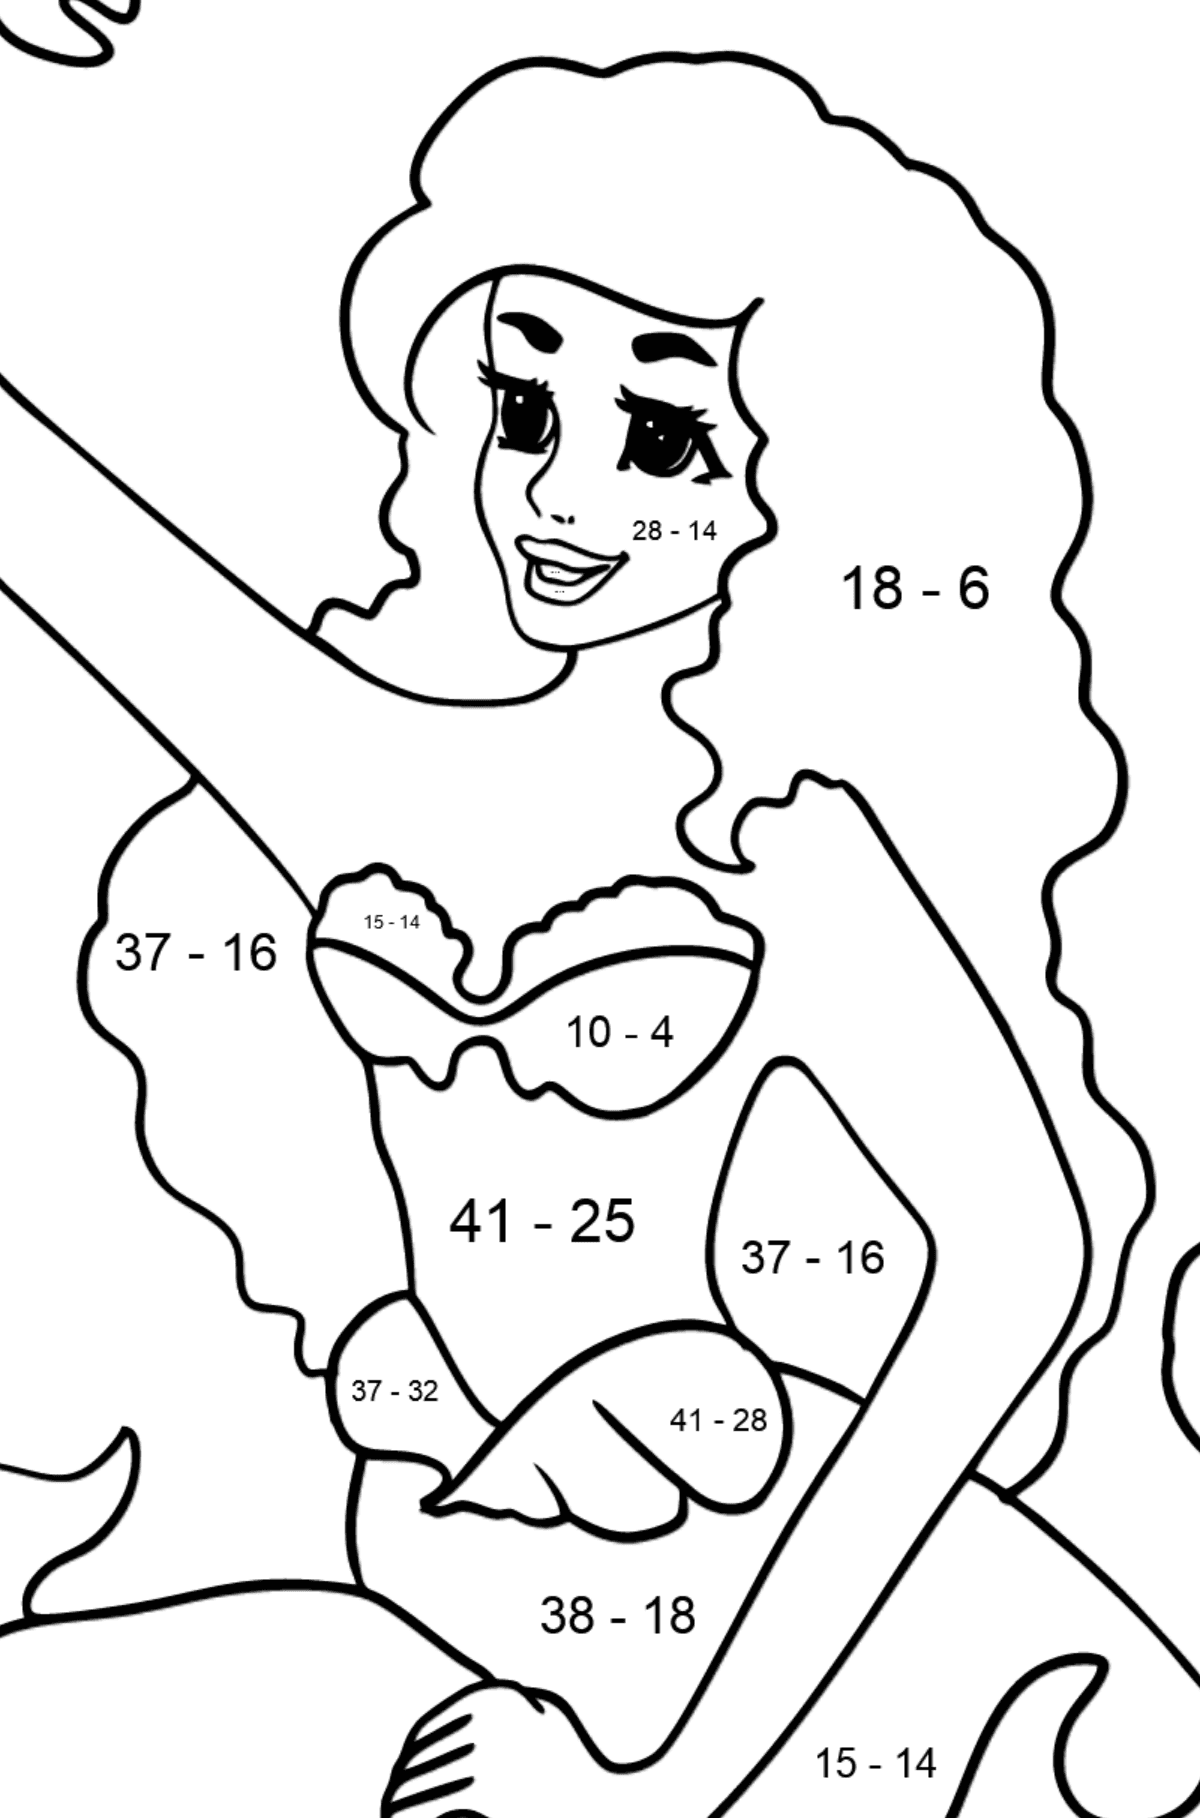 Coloring Page Mermaid and Crab - Math Coloring - Subtraction for Kids